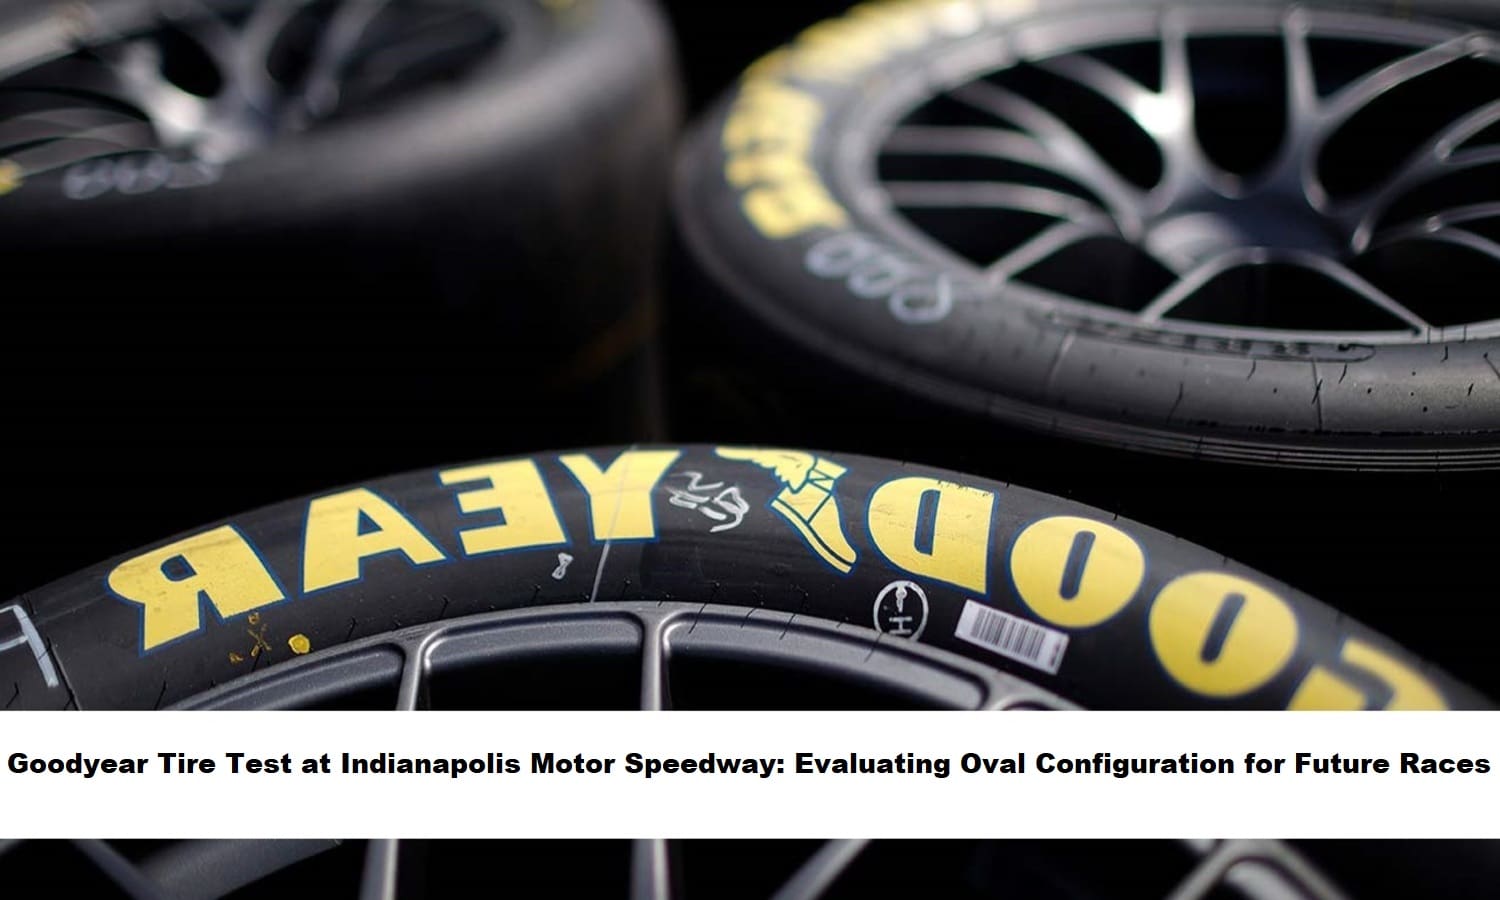 goodyear-tire-test-at-indianapolis-motor-speedway-evaluating-oval-configuration-for-future-races